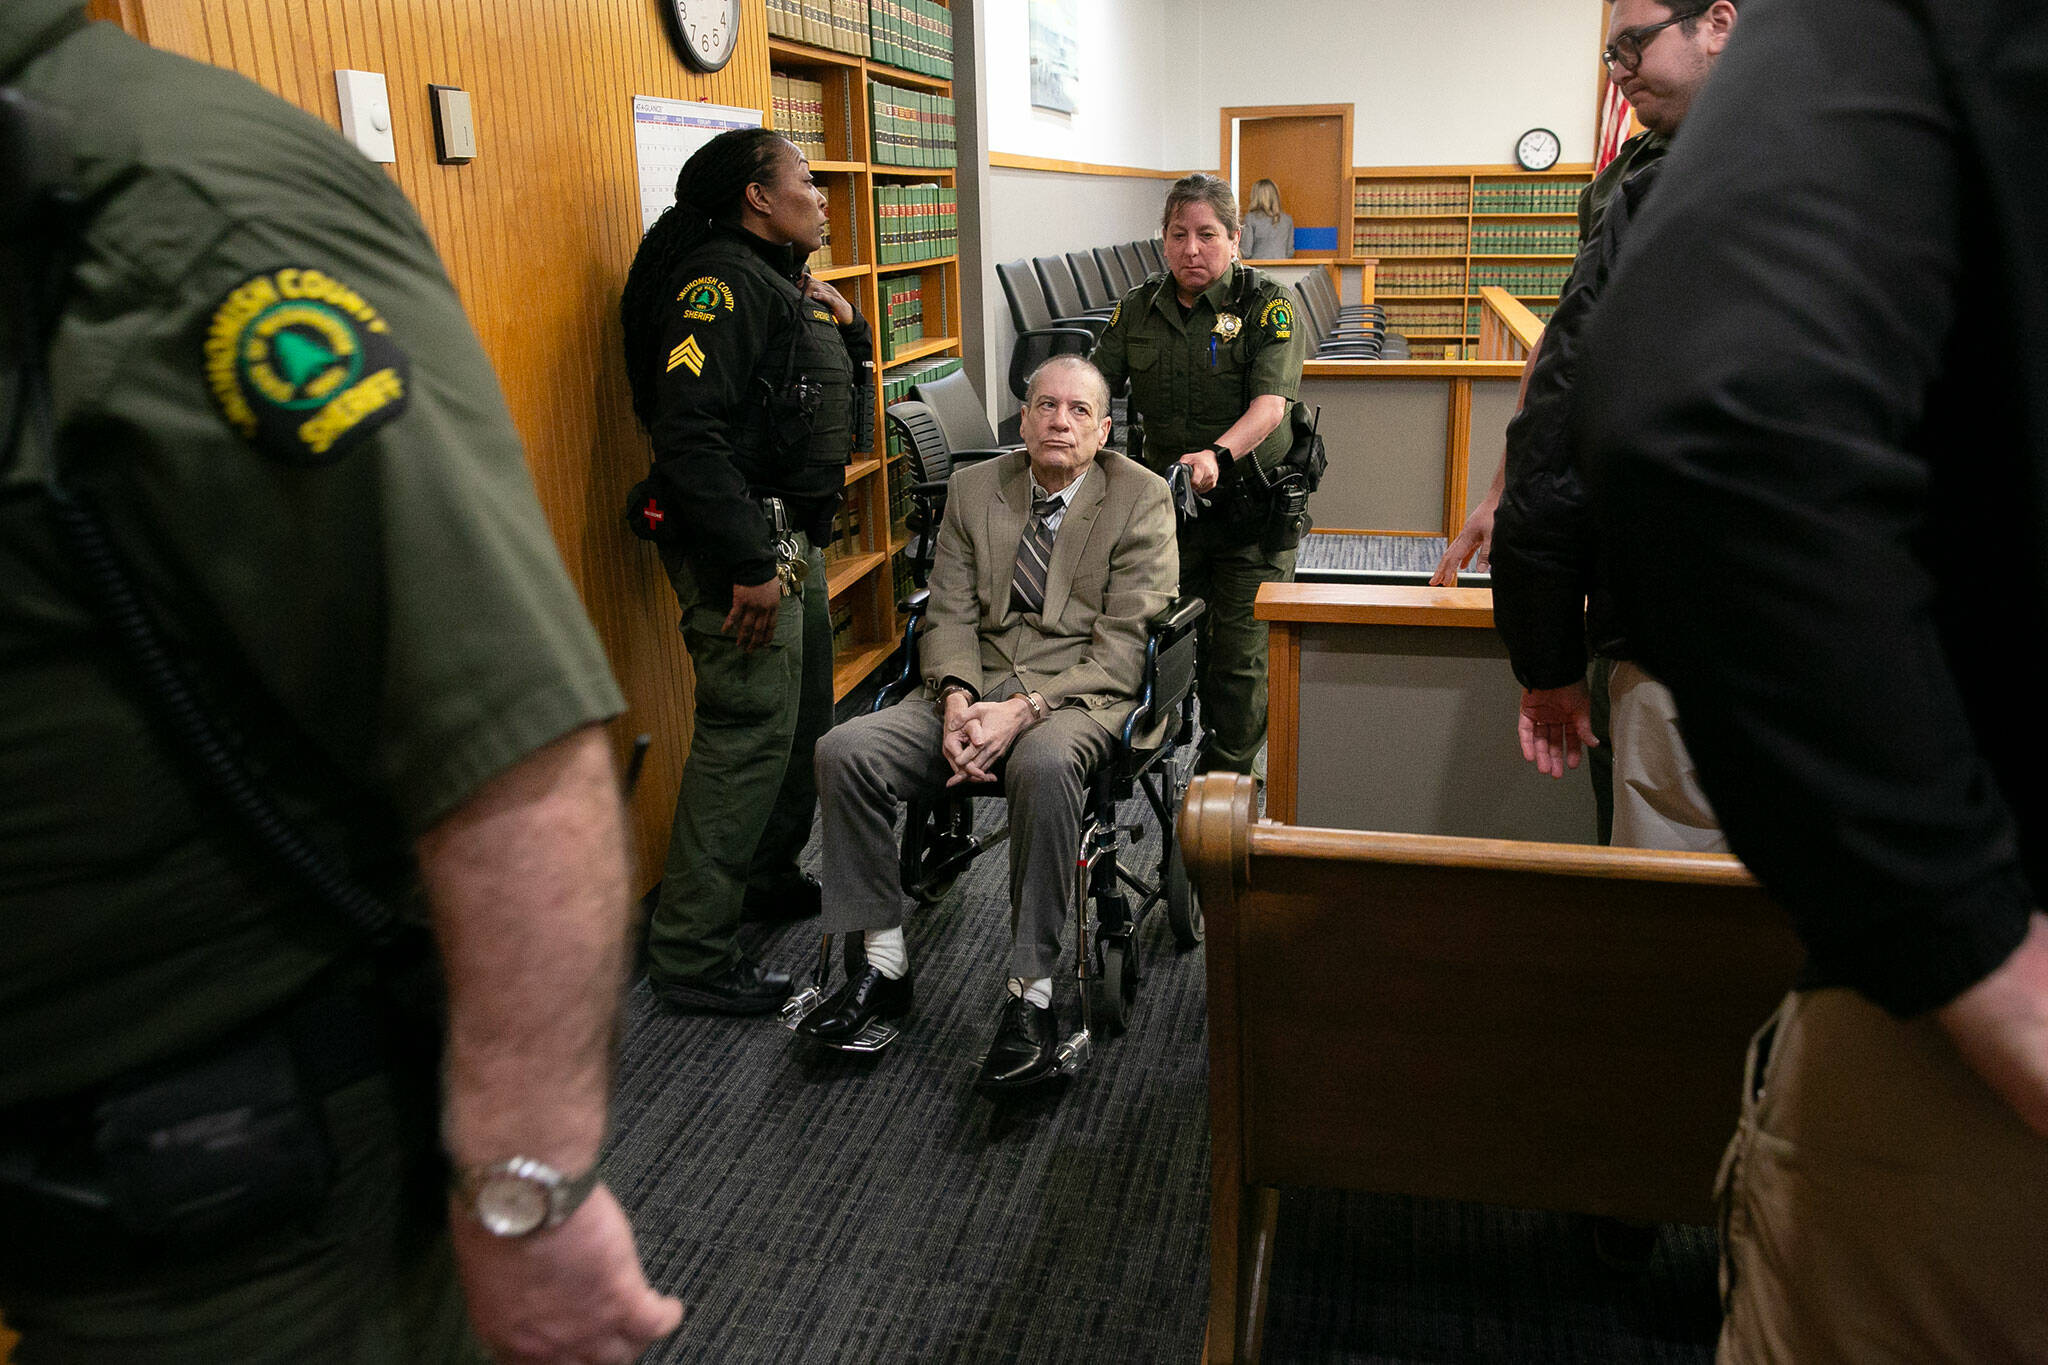 Alan Dean is removed from the courthouse after being convicted of the 1993 murder of 15-year-old Bothell girl Melissa Lee on Thursday, March 28, 2024, at Snohomish County Superior Court in Everett, Washington. (Ryan Berry / The Herald)